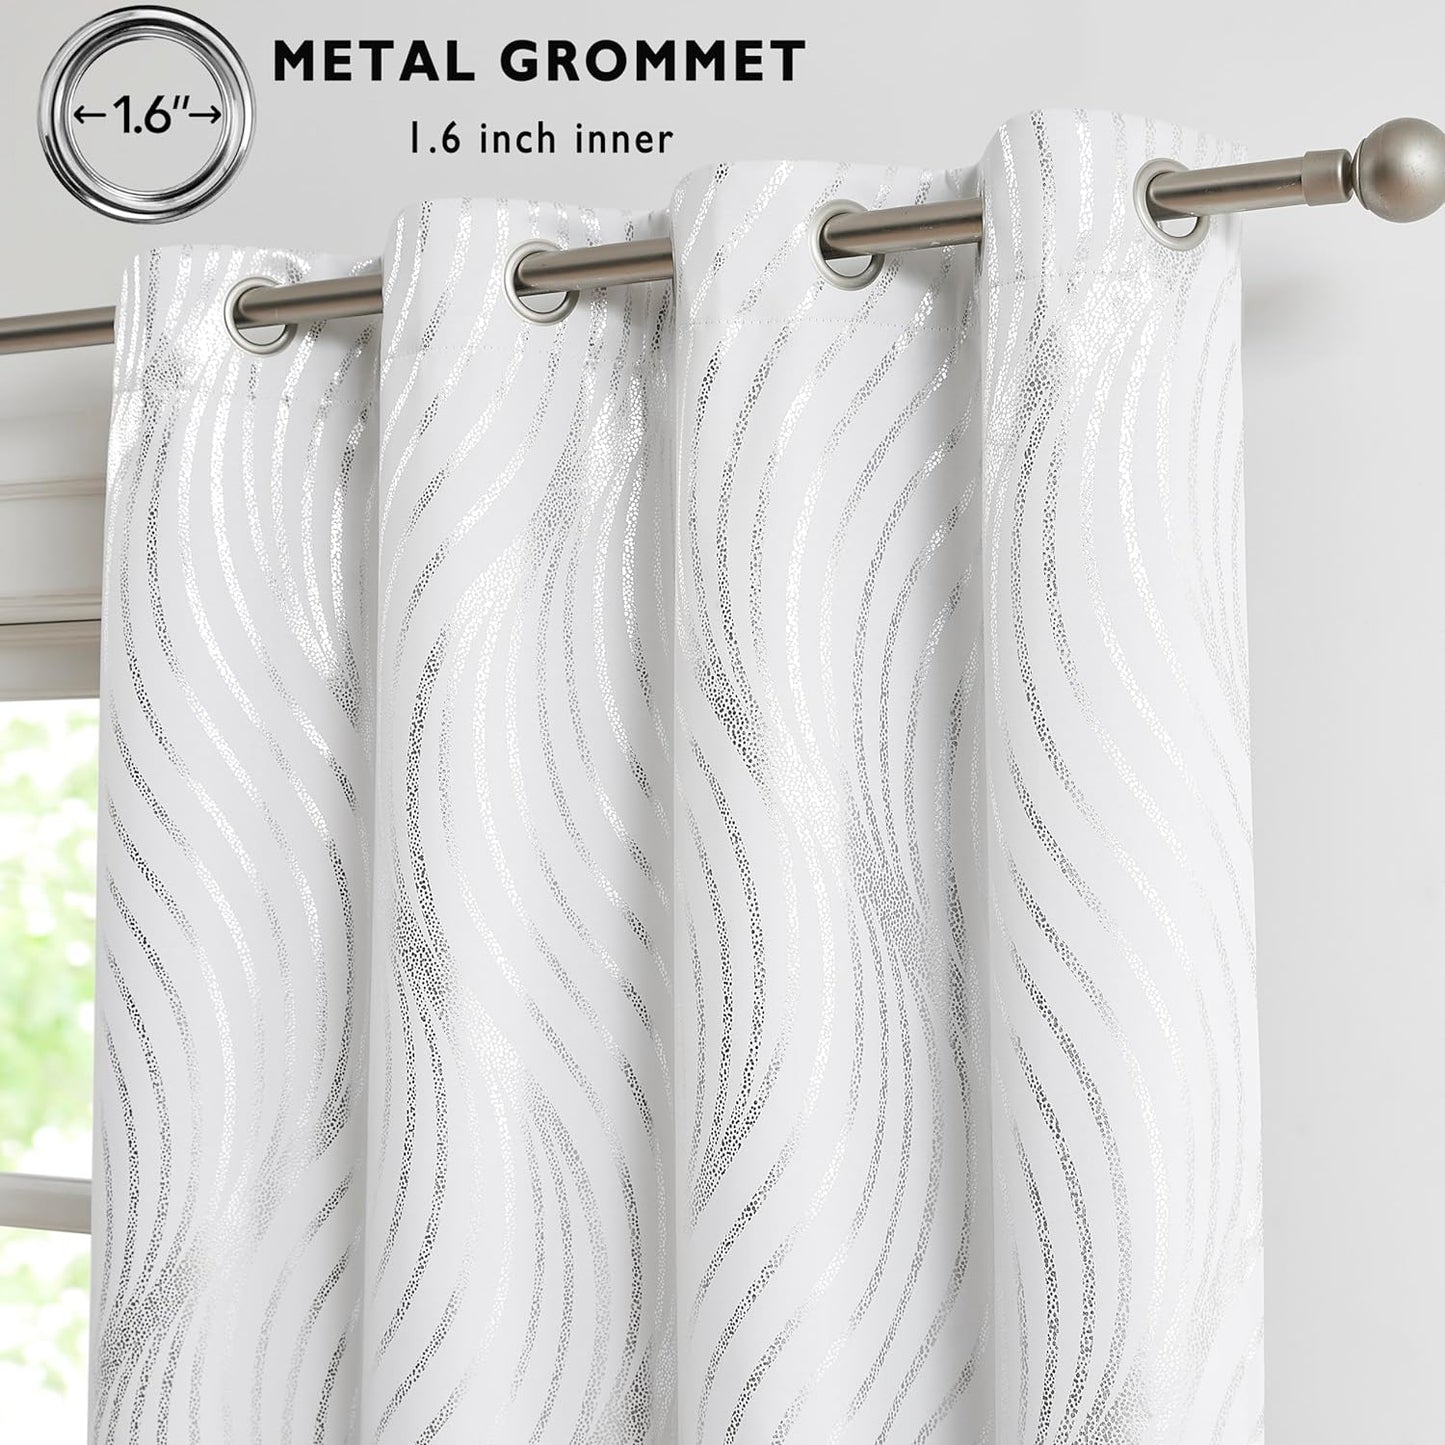 Xwincel Full Blackout Curtains with Silver Metallic Wave Print,84 Inches Long Thermal Insulated Sound Proof Window Treatments for Living Room Bedroom, Grommets Top Design,White,52W X 84L,2 Panel Sets  Xwincel   